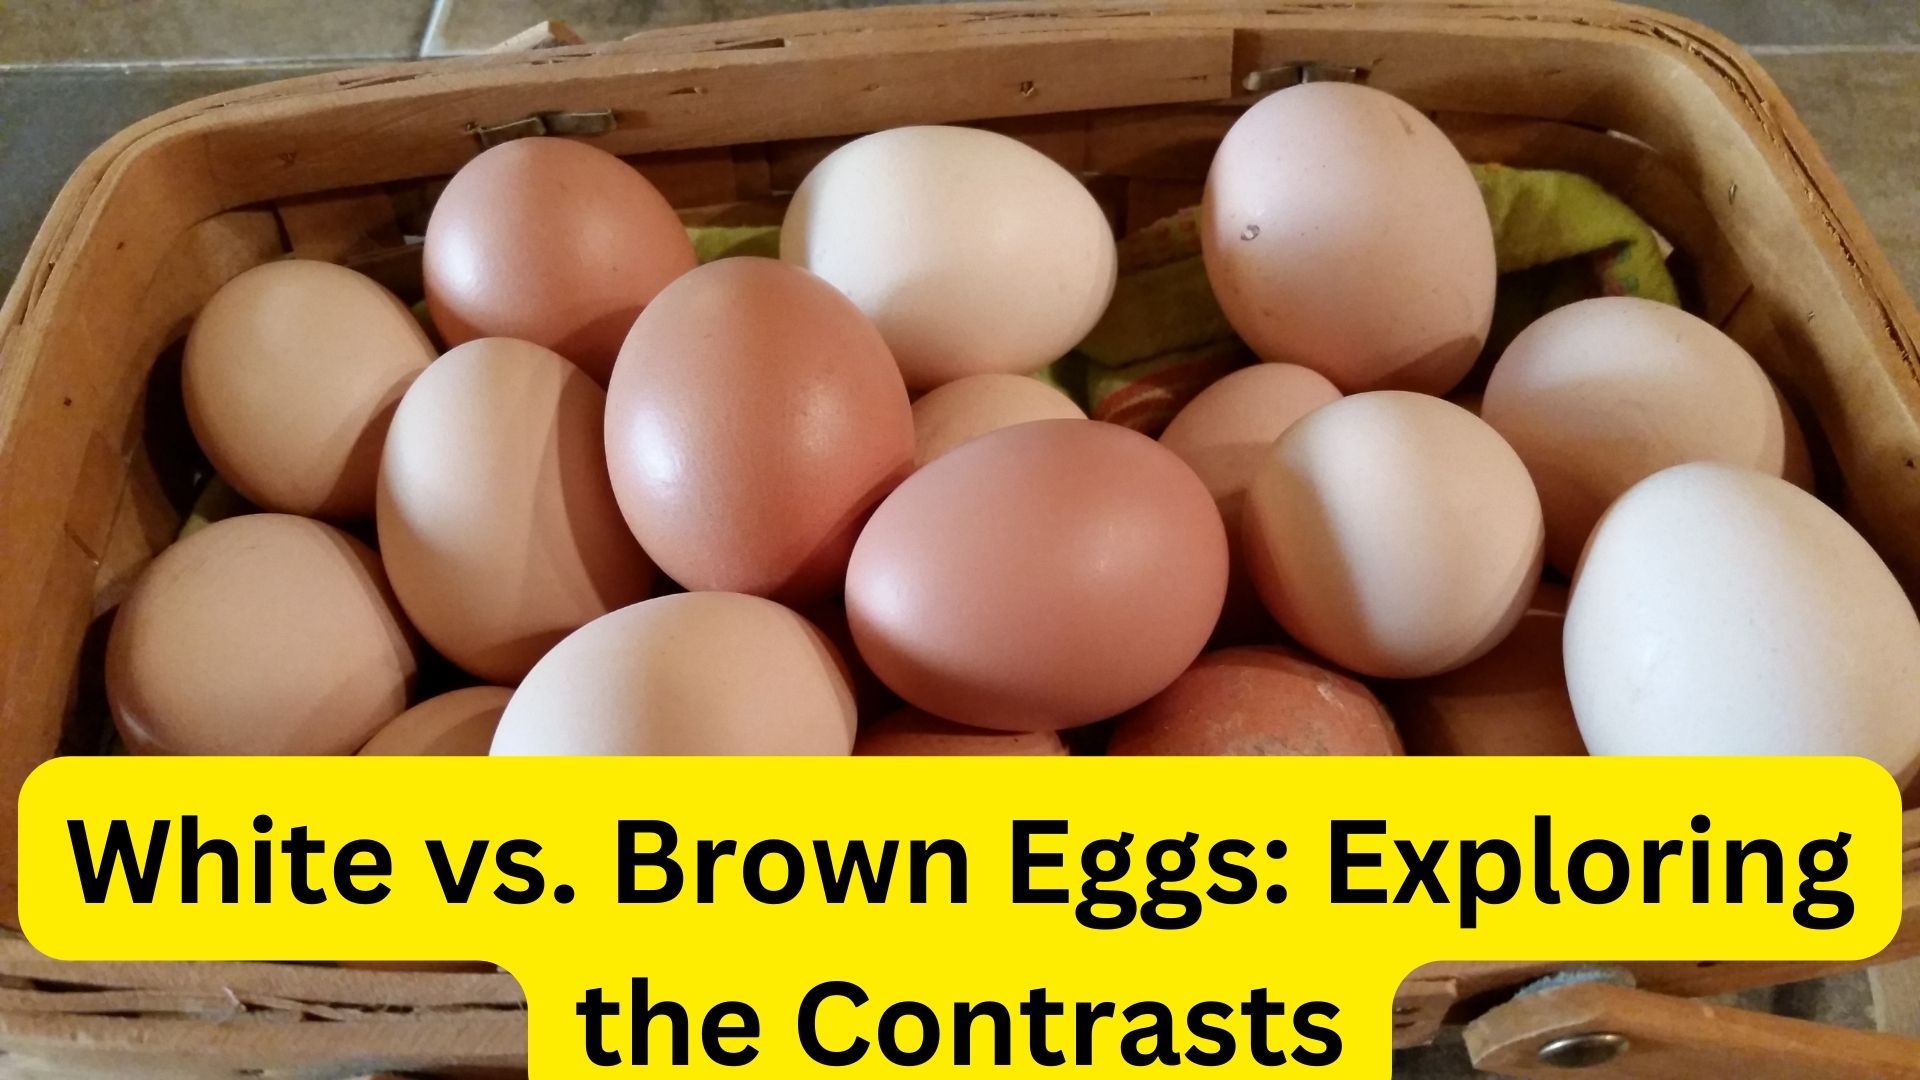 White vs. Brown Eggs: Exploring the Contrasts